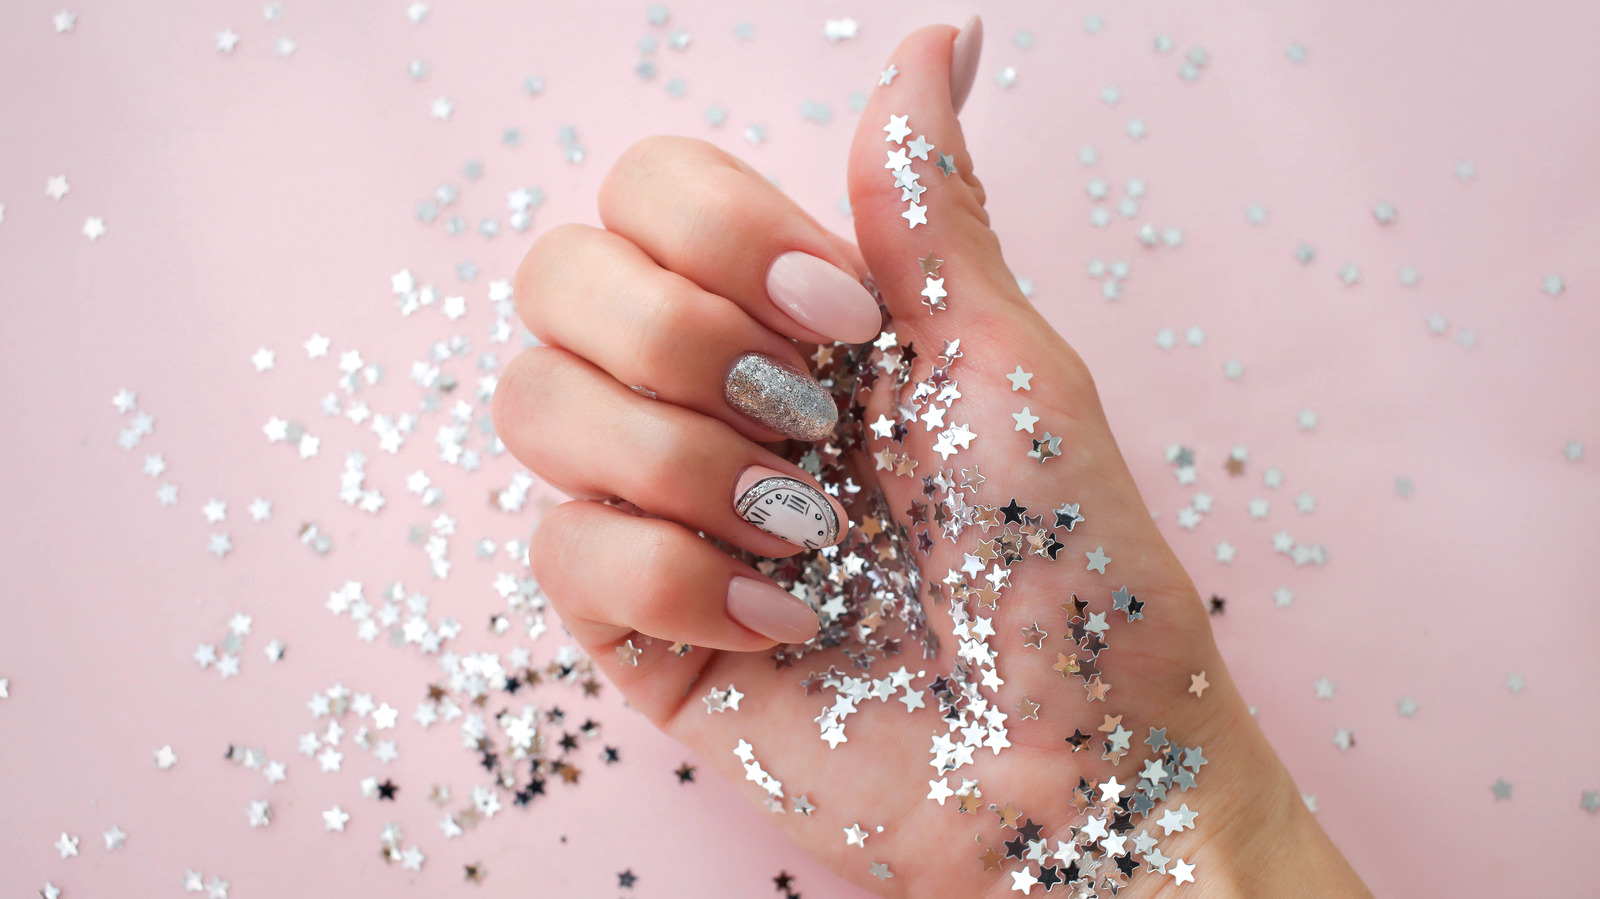 7. "Fresh Nail Art Inspiration for Your Next Manicure" - wide 6